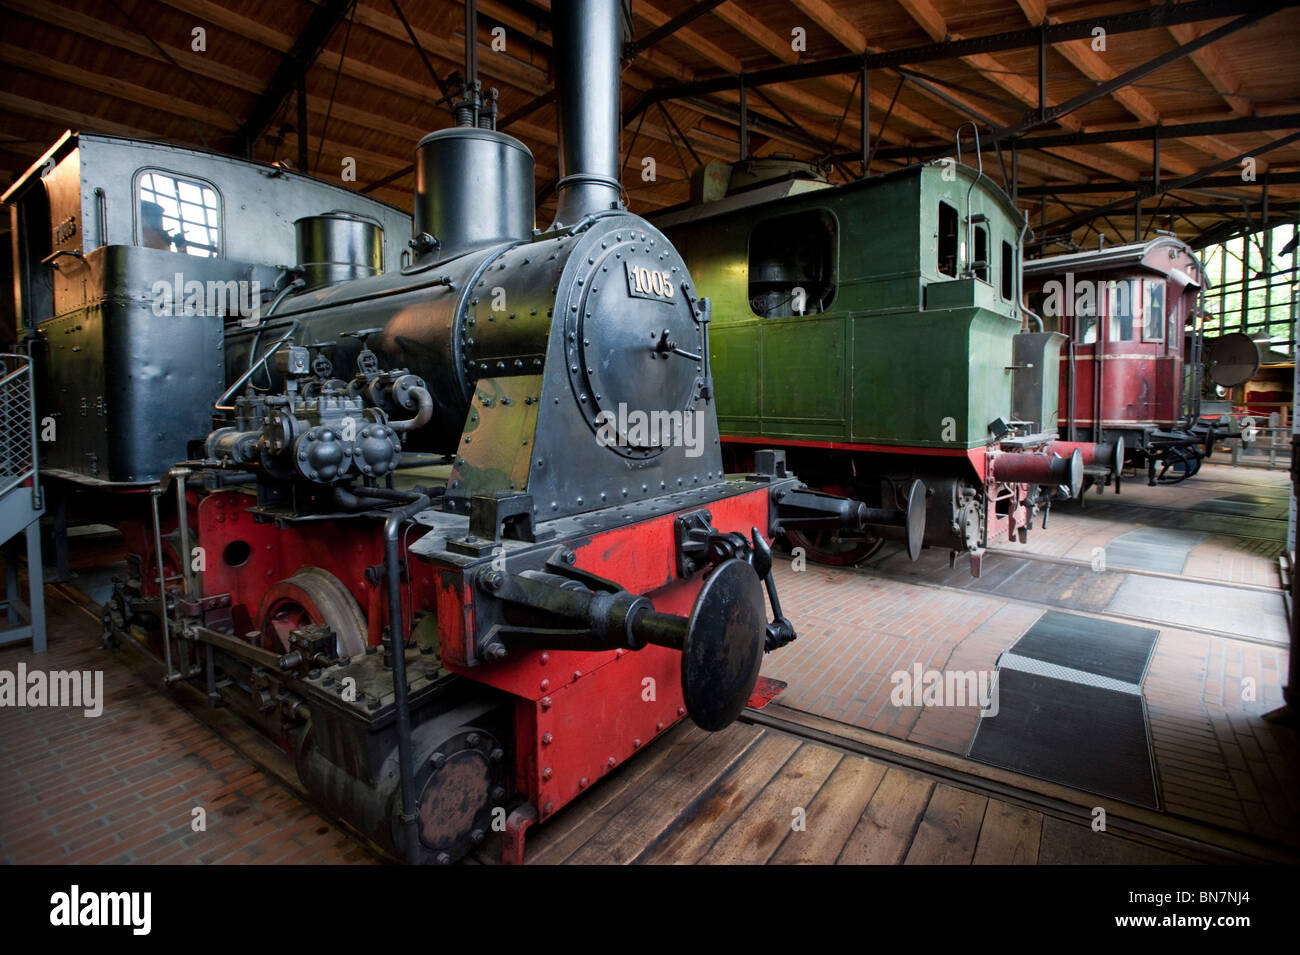 Old steam locomotives and trains on display at Deutches Technikmuseum in Berlin Germany Stock Photo